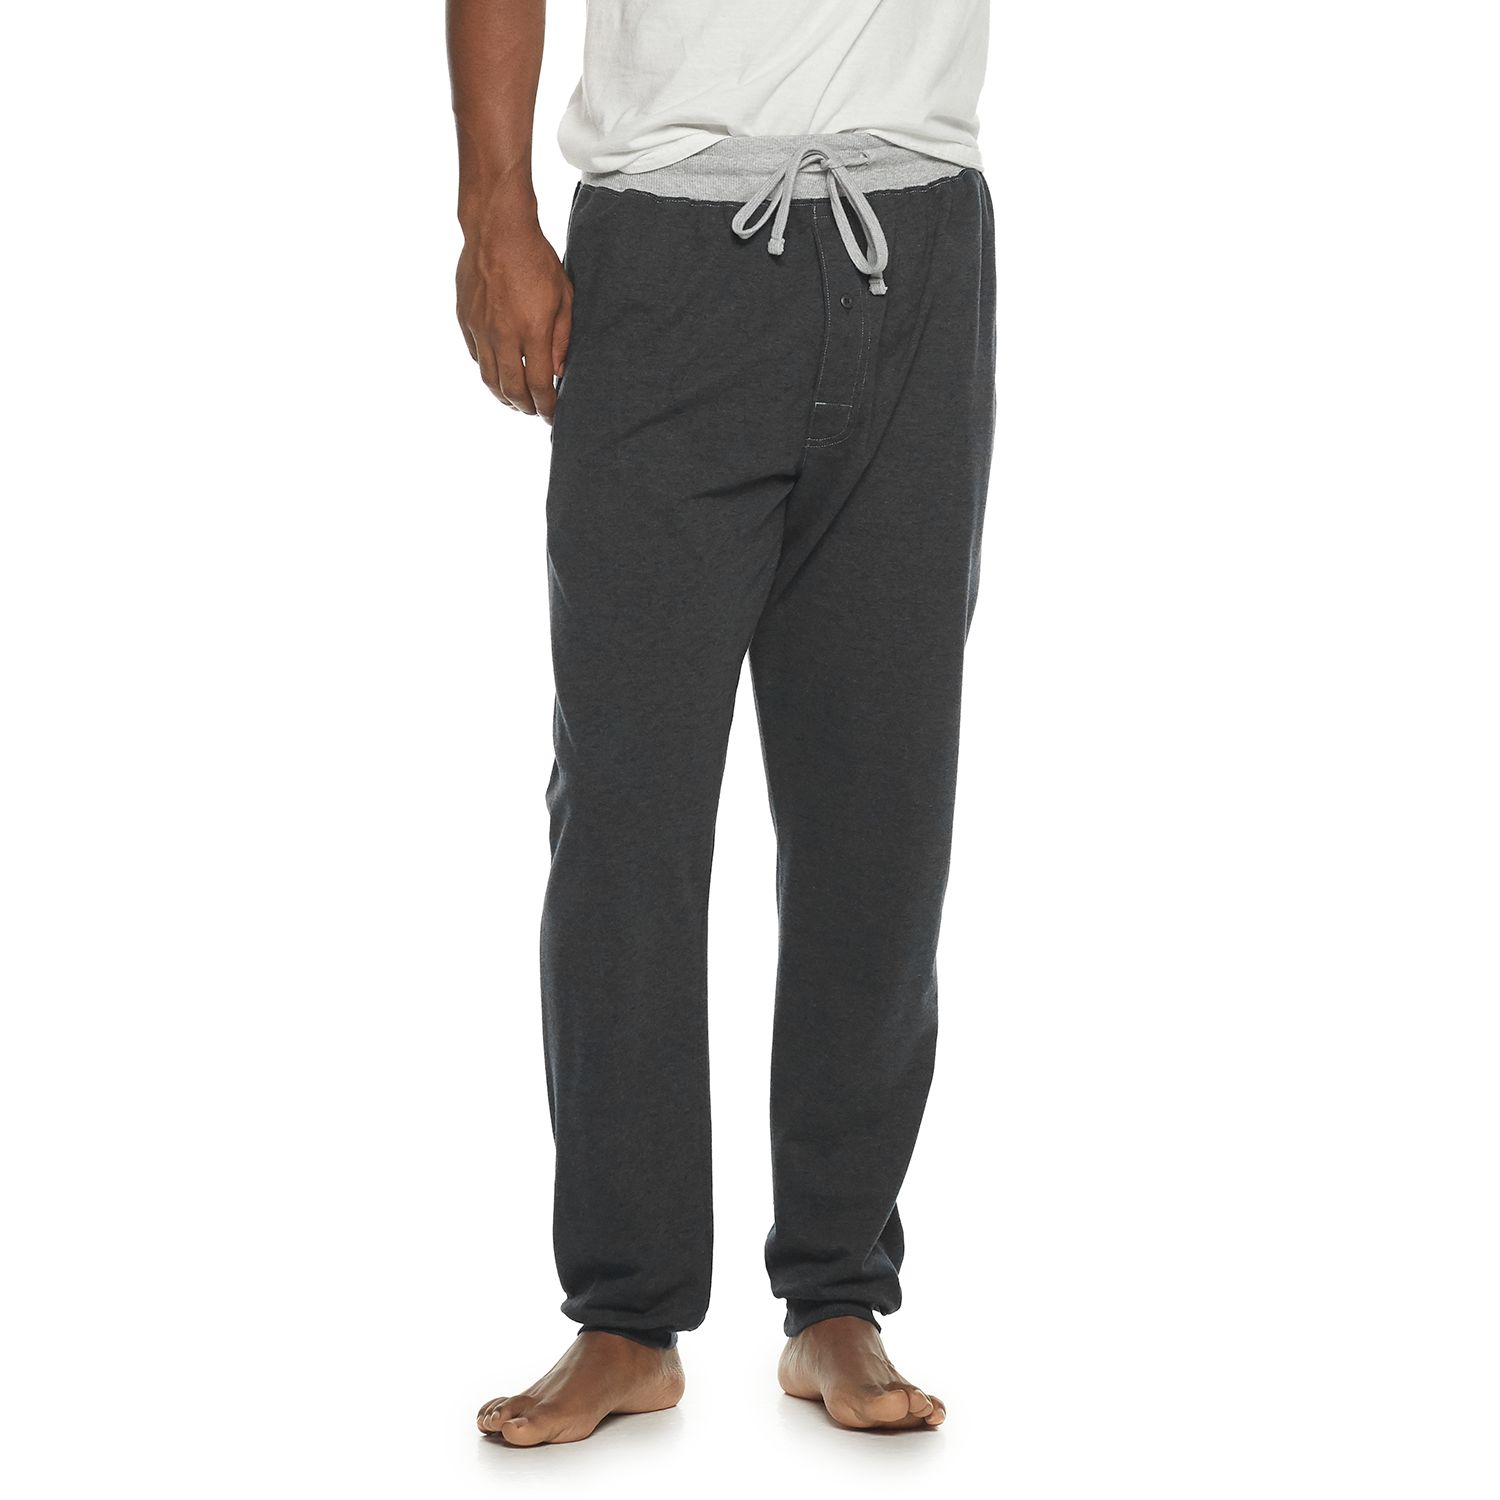 Image for Hanes Men's 1901 Heritage French Terry Sleep Jogger Pants at Kohl's.